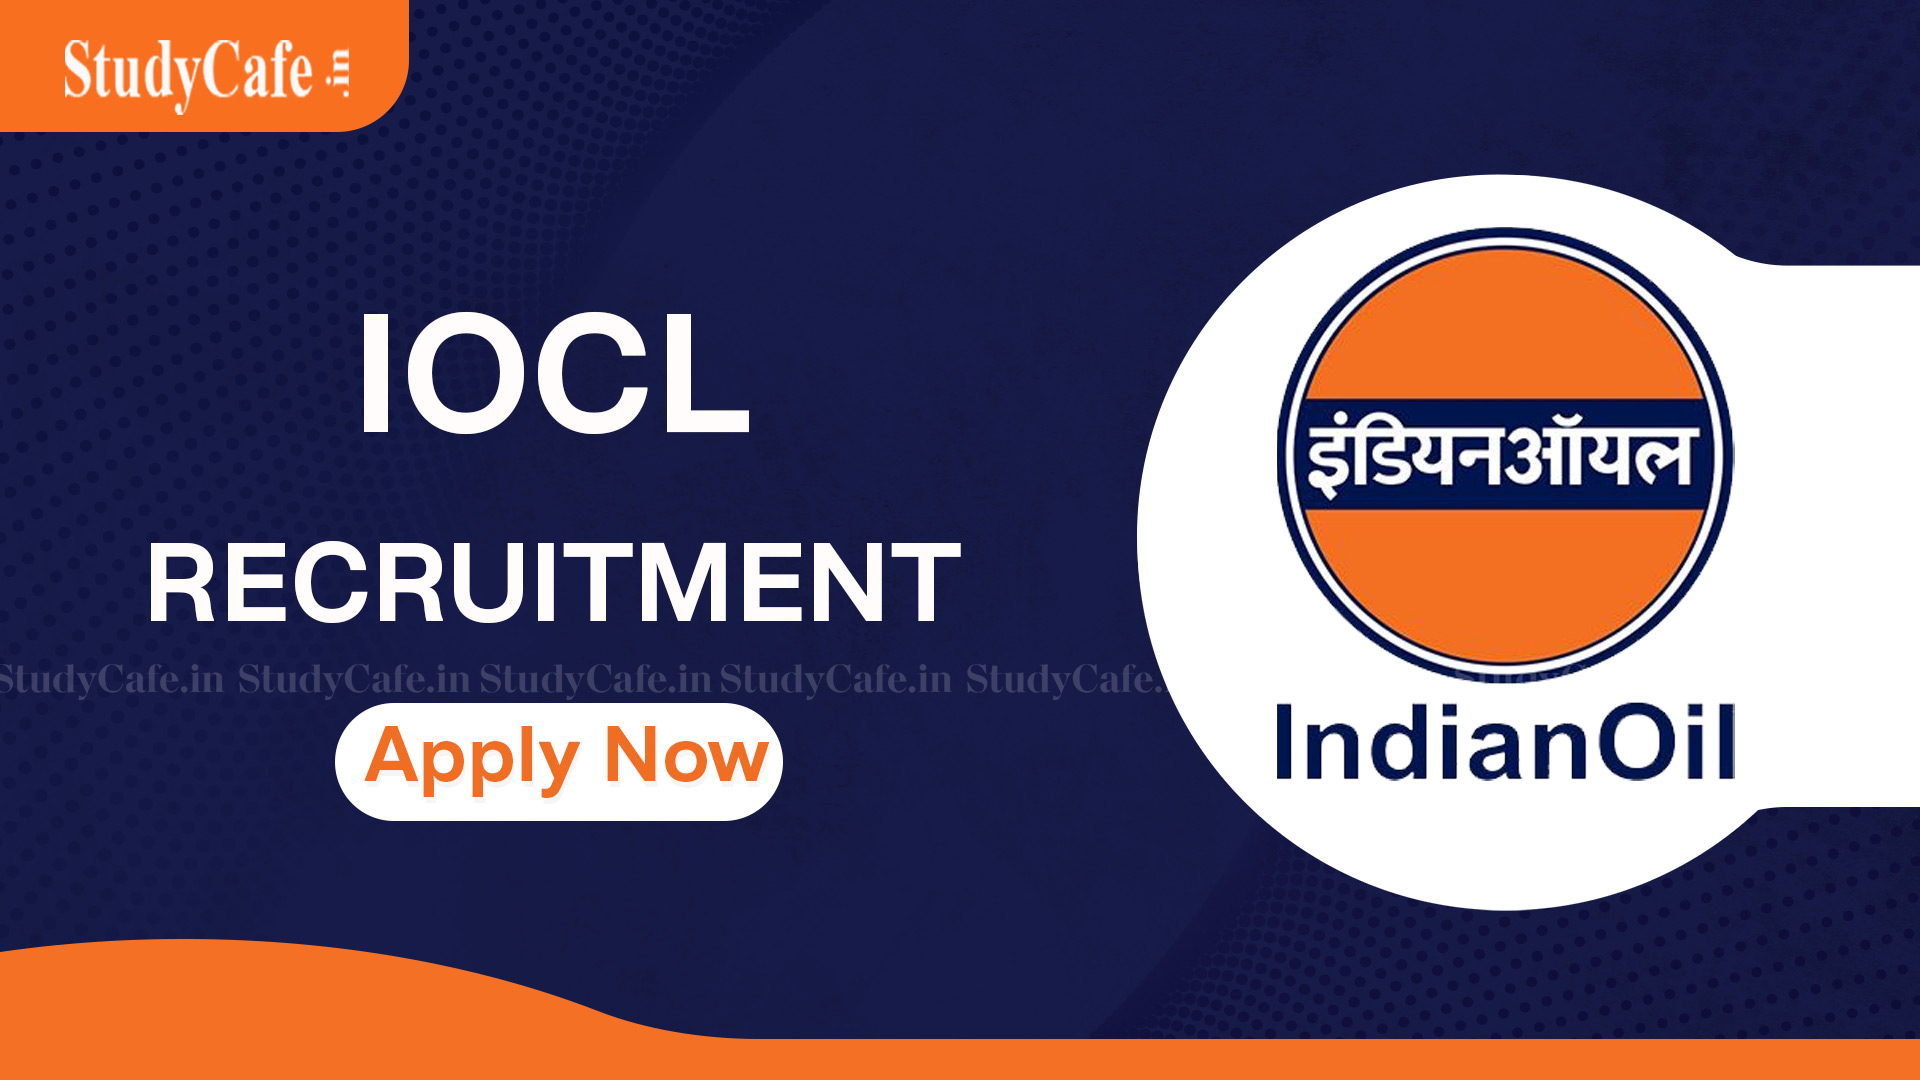 IOCL Recruitment 2022: Check Posts, Age Limit, How to Apply, and Other Details Here